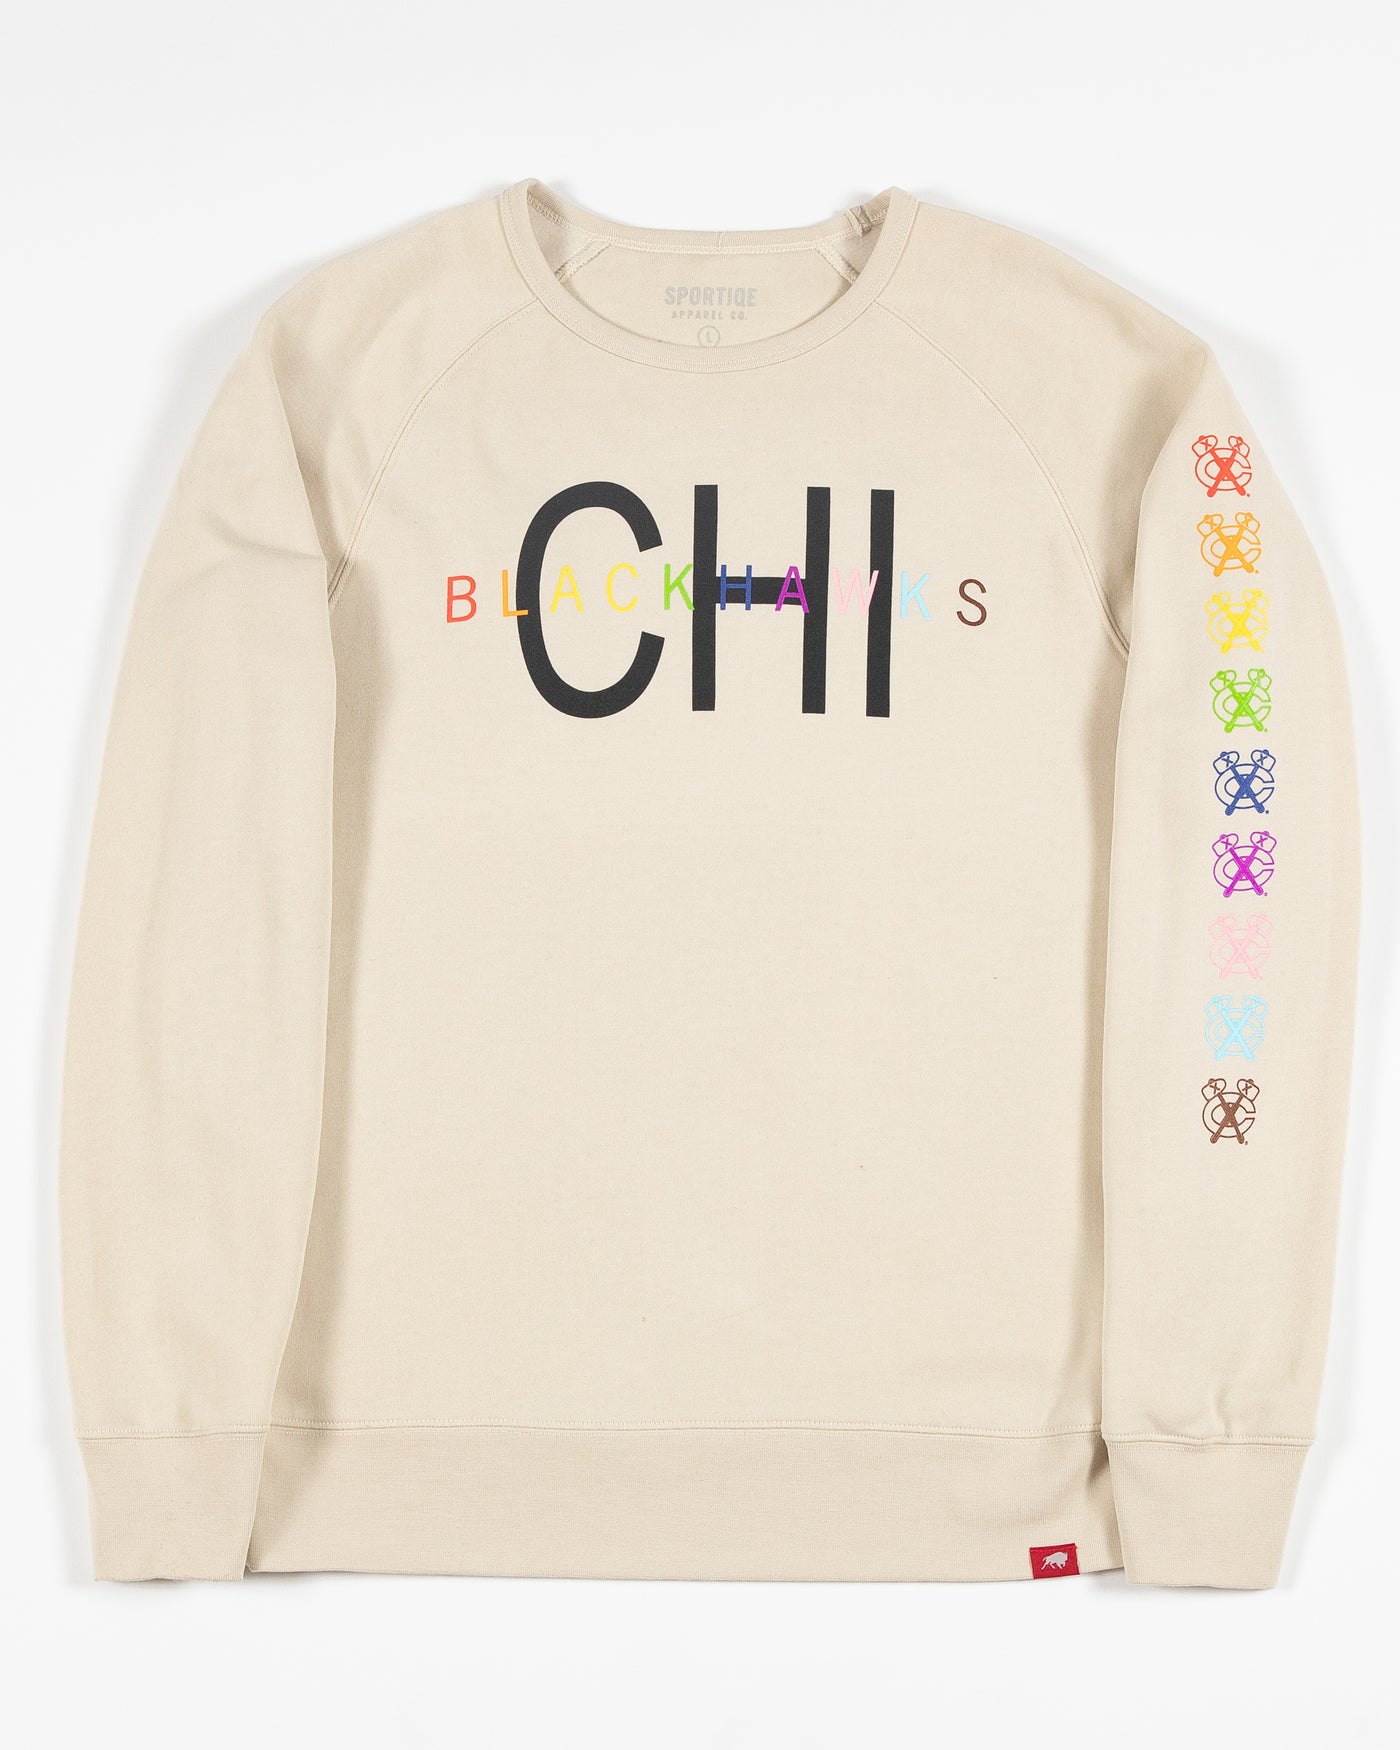 Off white colored crewneck with Chicago Blackhawks wordmark graphics in pride colorway along front chest and down left arm - front lay flat